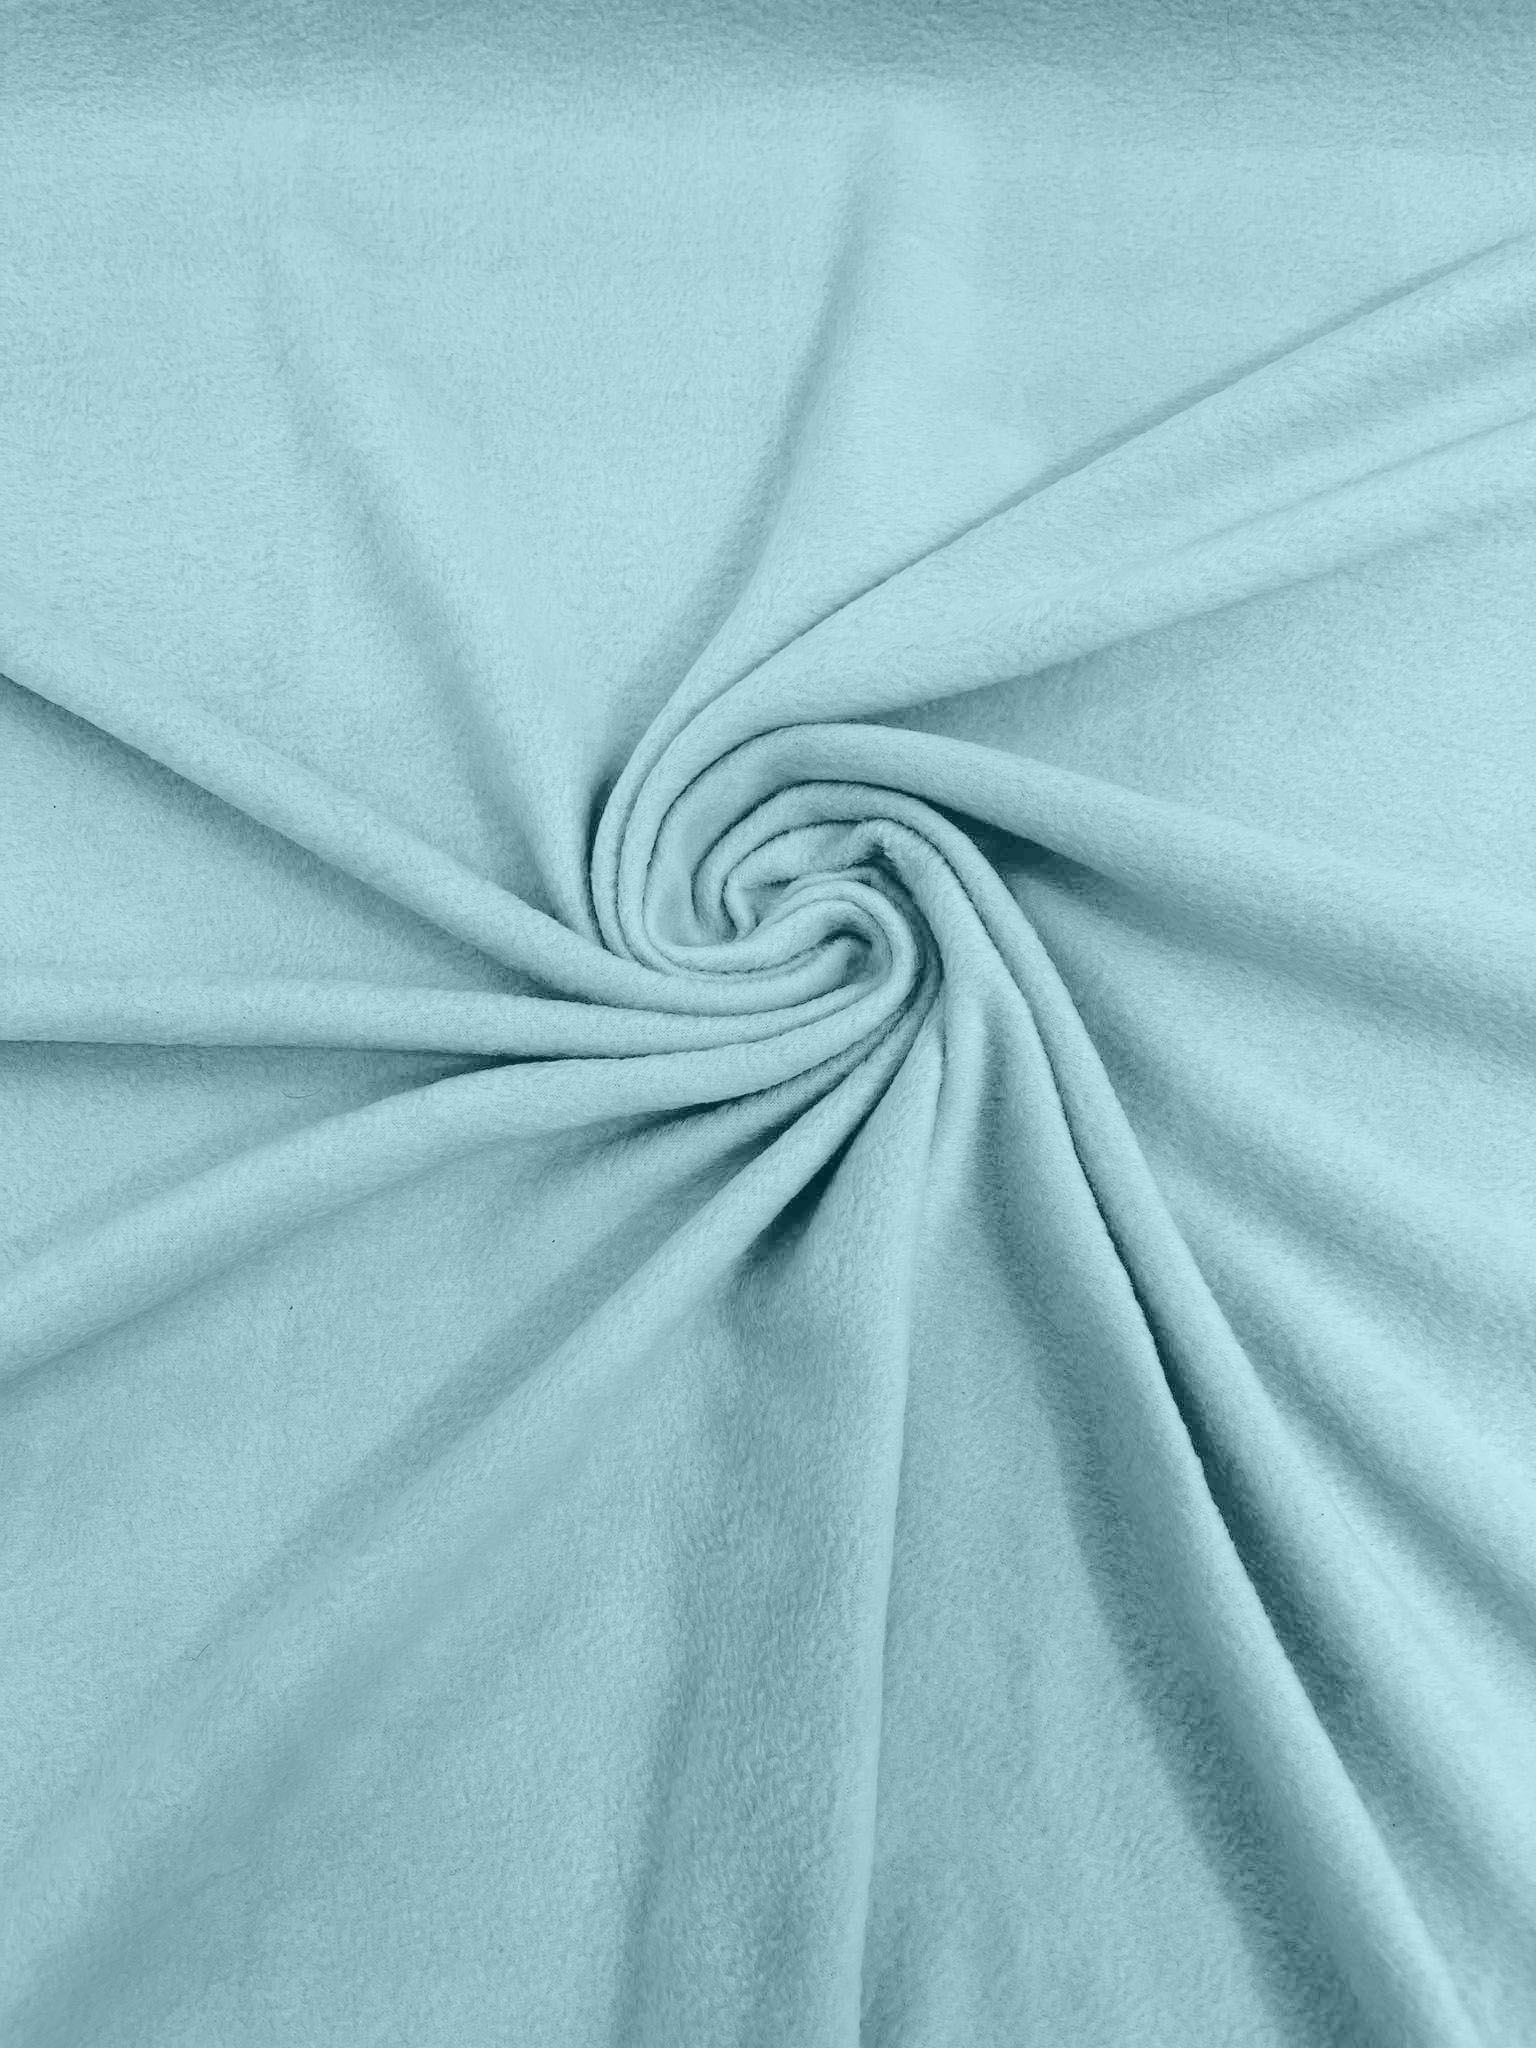 Ice Blue Solid Polar Fleece Fabric Anti-Pill 58" Wide Sold by The Yard